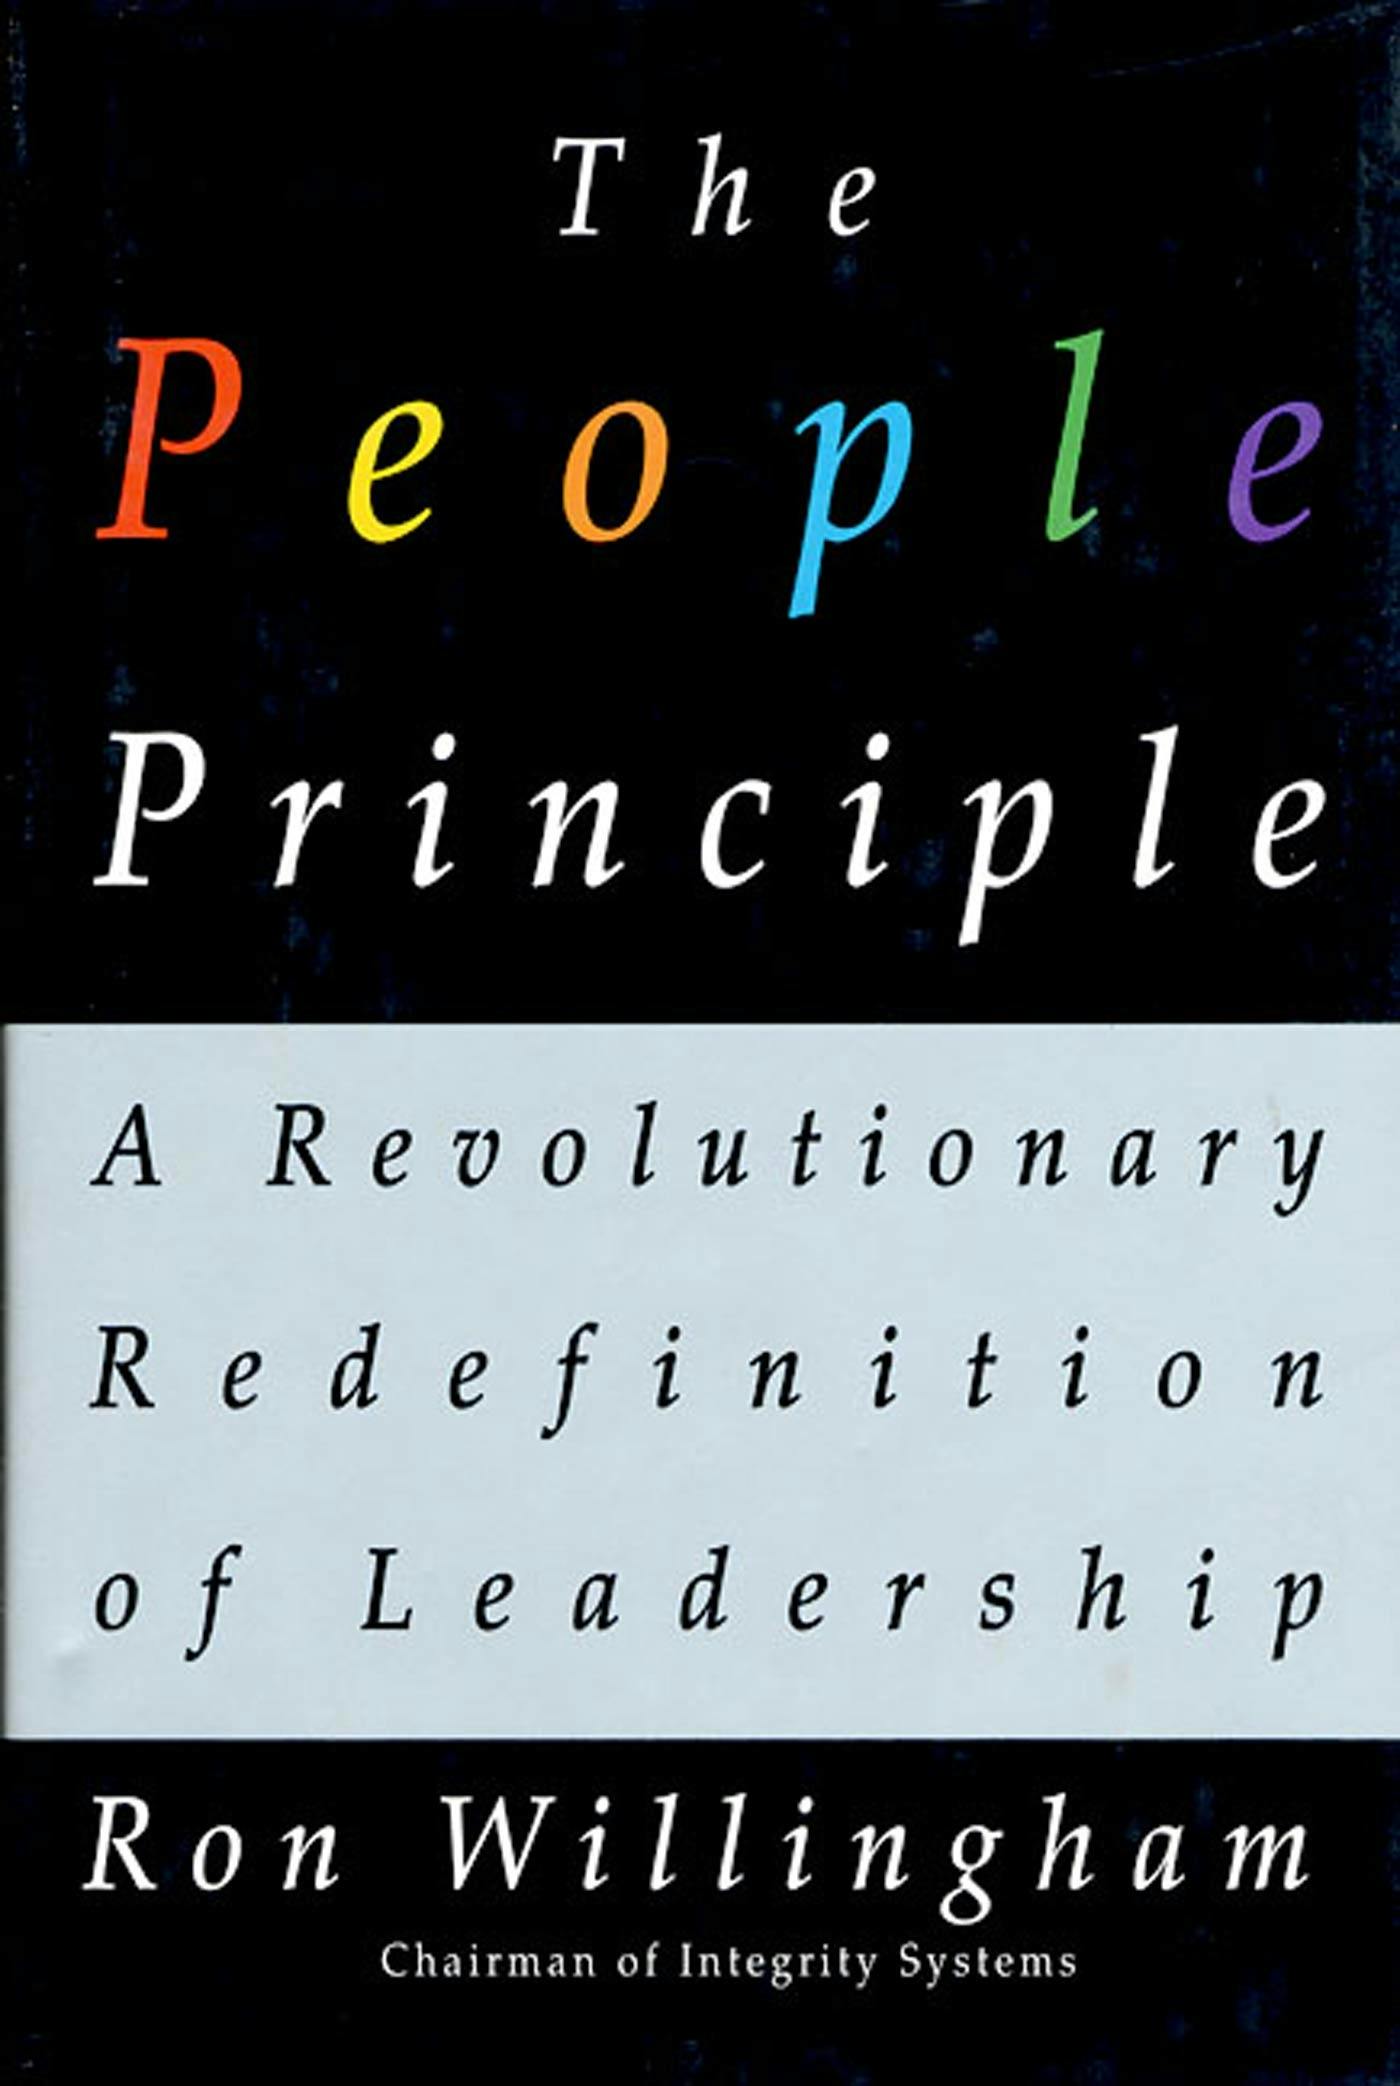 Describes for The People Principle by authors